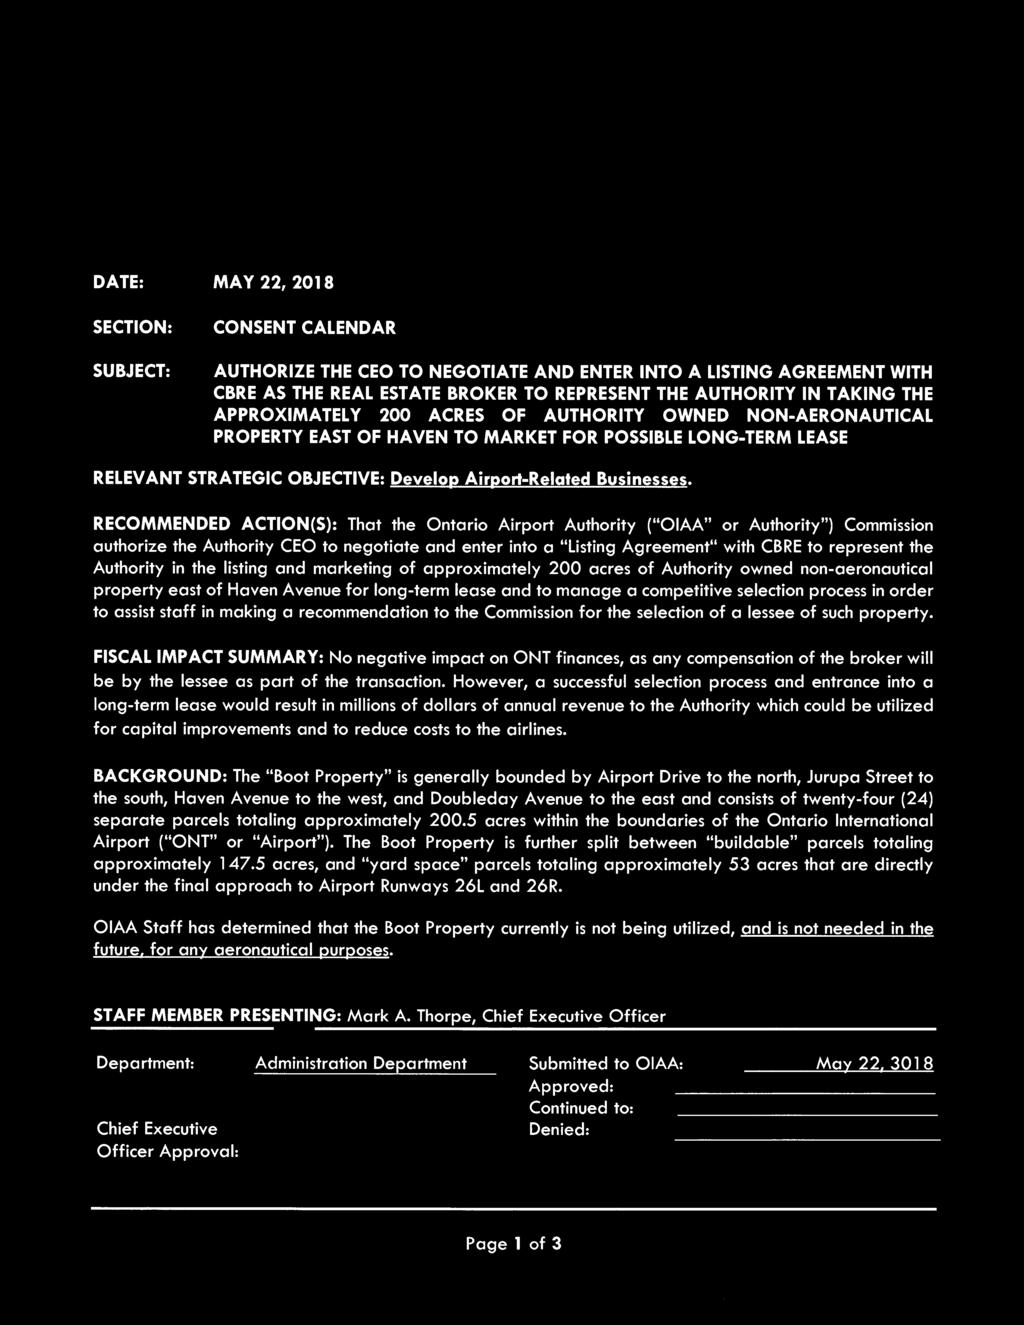 ONT ARIO INTERNATIONAL AIRPORT AUTHORITY INTERNATIONAL AIRPORT \DATE: MAY 22, 2018 SECTION: SUBJECT: CONSENT CALENDAR AUTHORIZE THE CEO TO NEGOTIATE AND ENTER INTO A LISTING AGREEMENT WITH CBRE AS